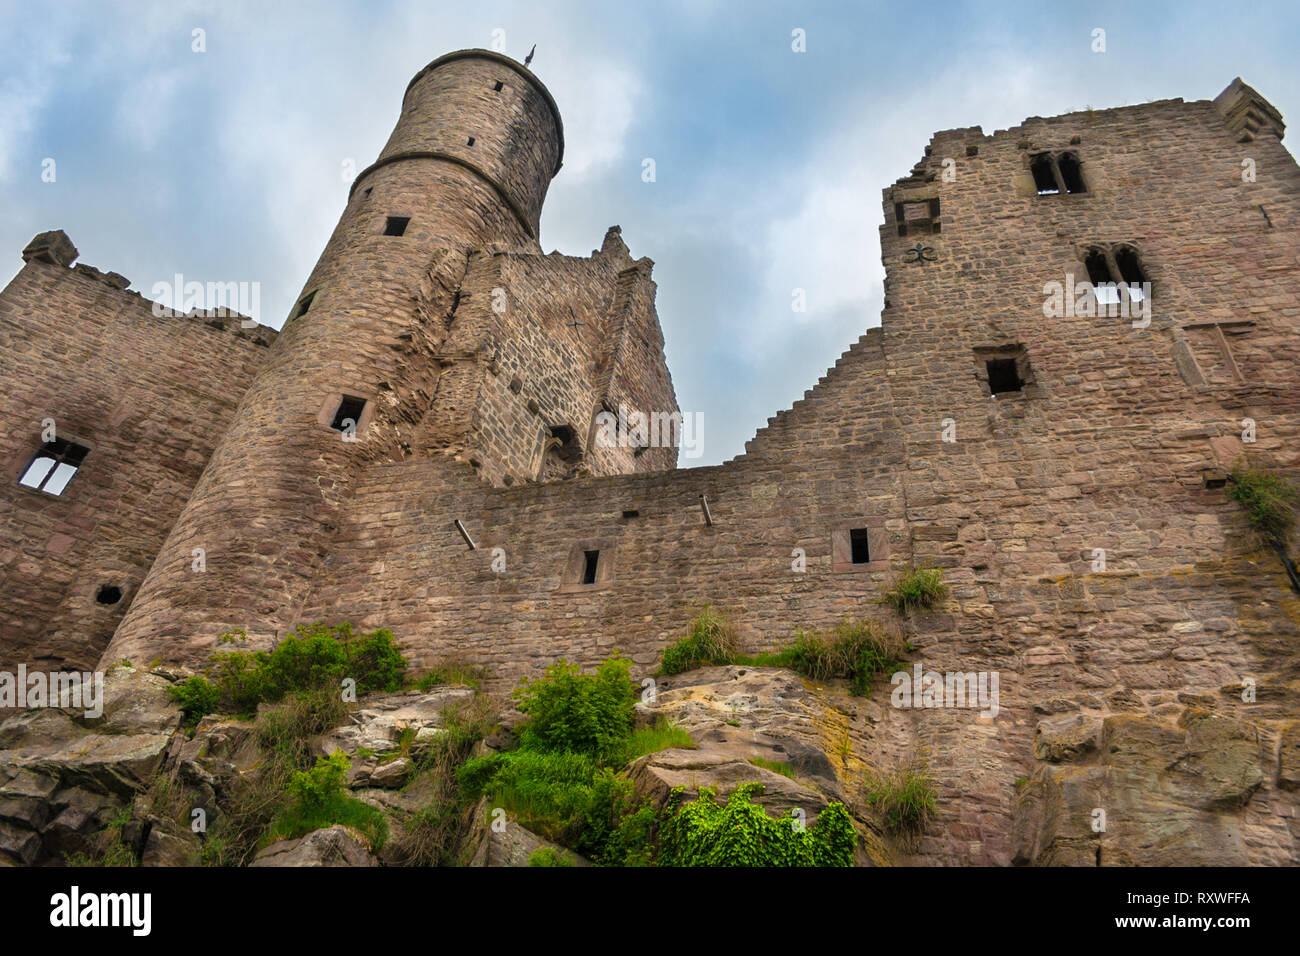 Impressive low-angle view of the south-western side of Hanstein Castle, one of the largest castle ruins in Central Germany. In its present extent it... Stock Photo